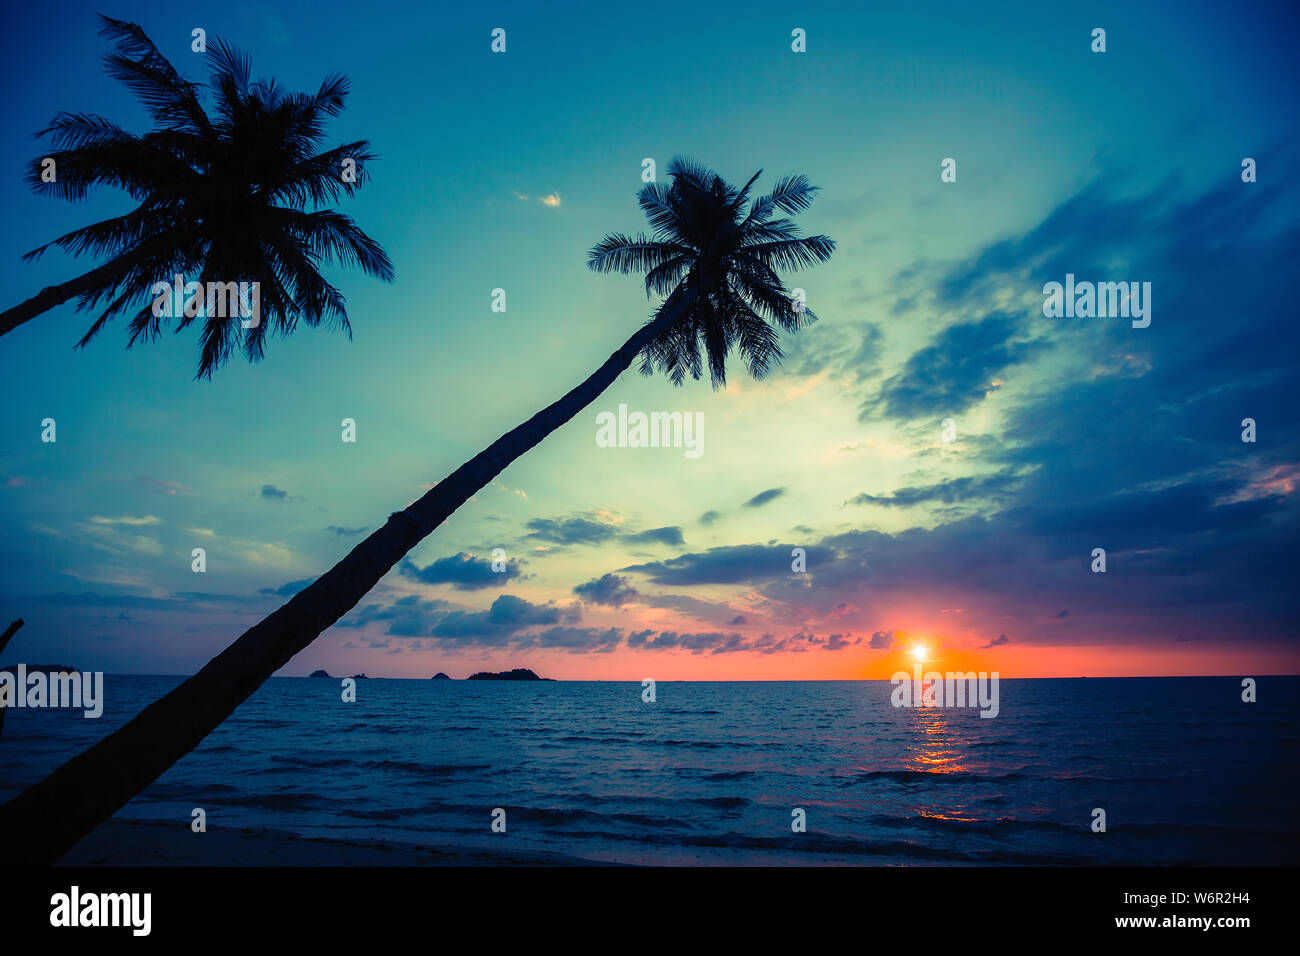 Silhouettes of tropical palm trees against a dusk blue sky. Stock Photo